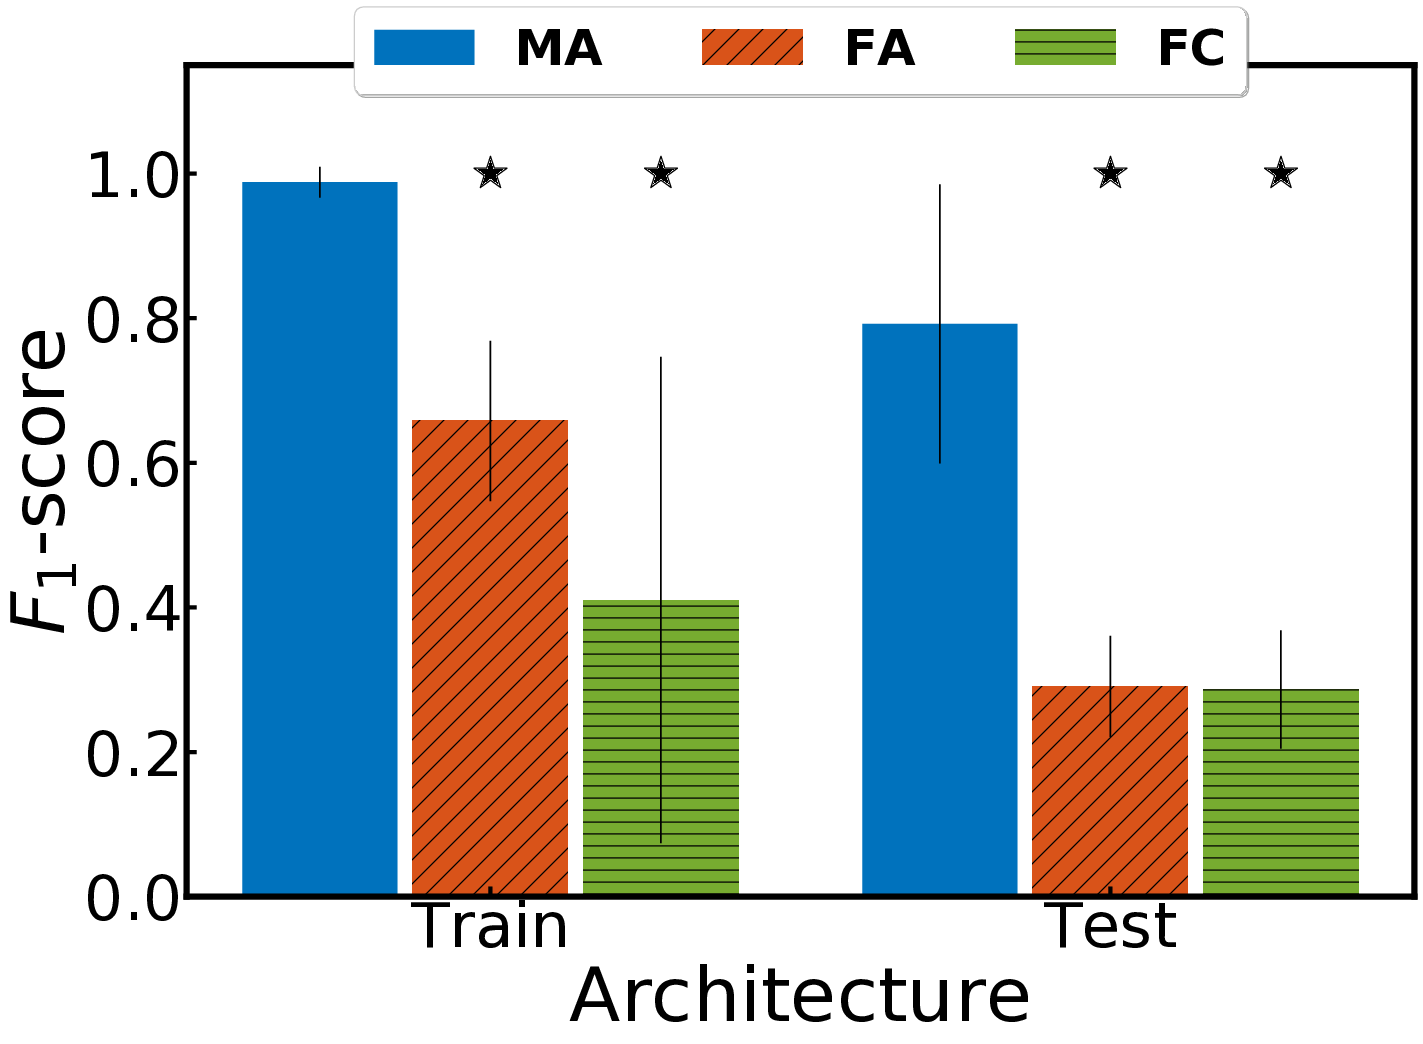 Generalization performance (F1 score) of differrent architectures for the reward function in the IMAGINE setting. MA denotes an architecture based on deep sets posessing the object-centered bias; FA and FC denote flat, non-object-centered baselines. Stars indicate significant difference.